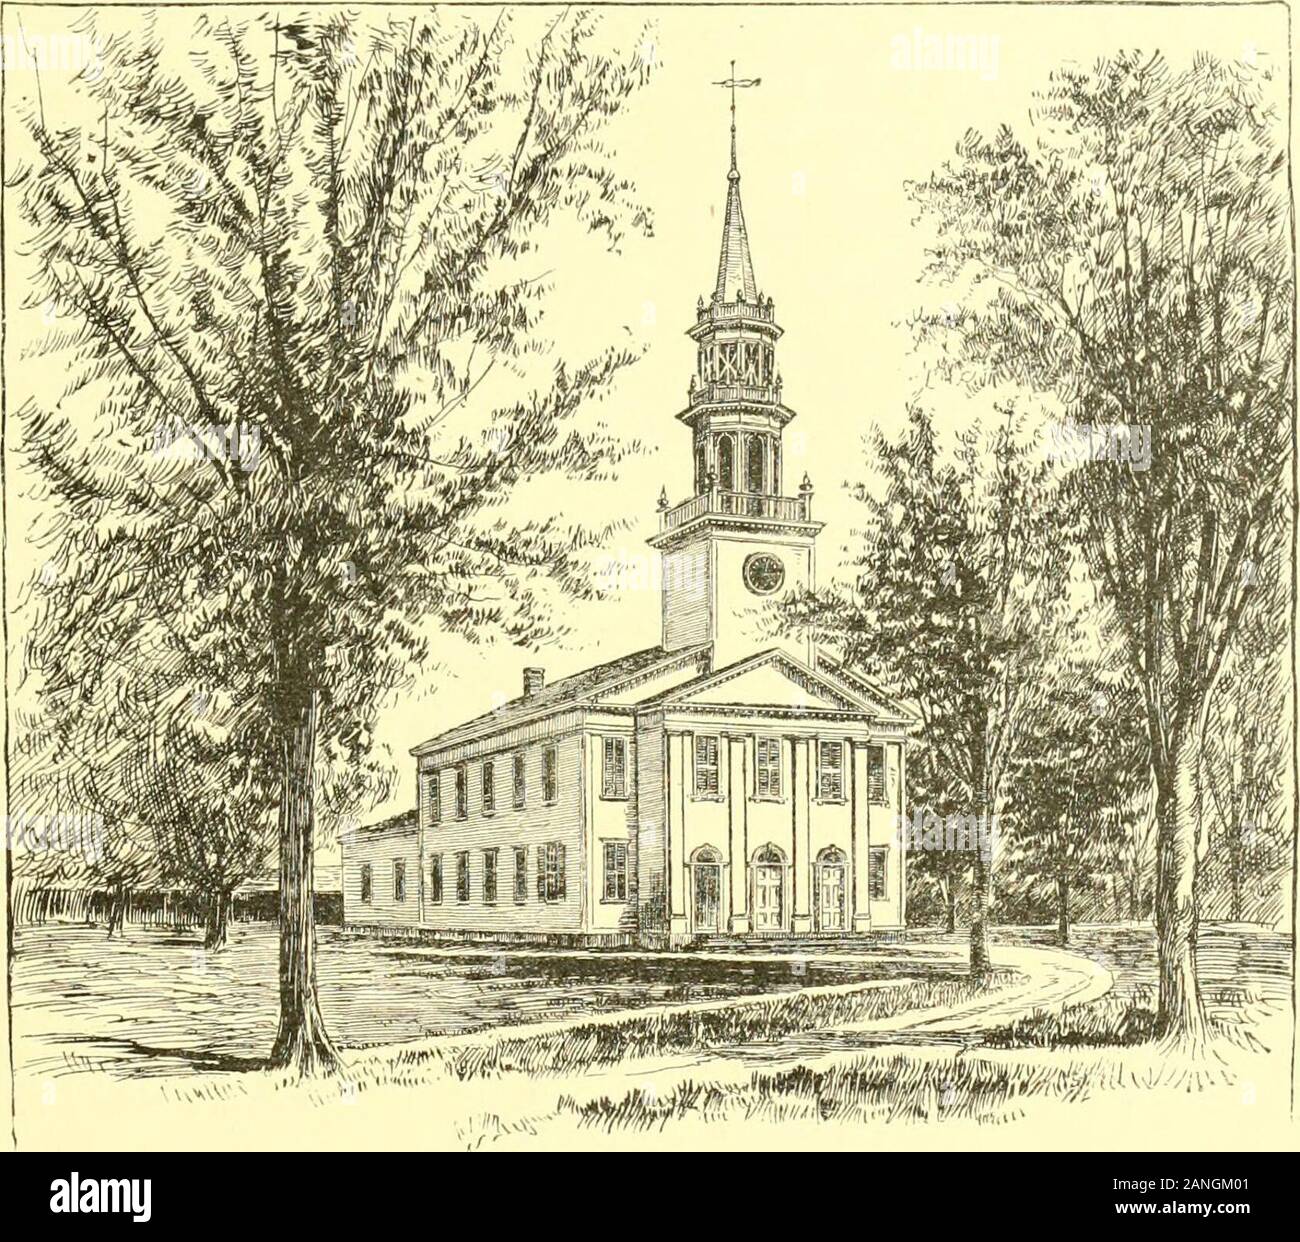 The memorial history of Hartford County, Connecticut, 1633-1884; . Farmington third) churchhave been Revs Bela Kellogg, 1819-1829; Francis H. Case, 1830- 1840; Stephen Hubbell, 1840-1853 ;Vi^ ^ J. S. Whittlesey (acting), 1853-1854; ^^A^ M^J^jP Henry M. Colton (acting), 1855-1857 ;c^^e^&gt;^.^^ ^^-^ E. D. Murphv, 1859-1864 ; George Cur- tis, 1866-1868; H. G. Marshall (act-ing), 1869-1871; C. P. Croft (acting), 1873-1875, and N. J. Seeley.The number of members at the formation of this church was thirty-one.About four hundred and fifty have been added since that time, and thepresent membership is Stock Photo